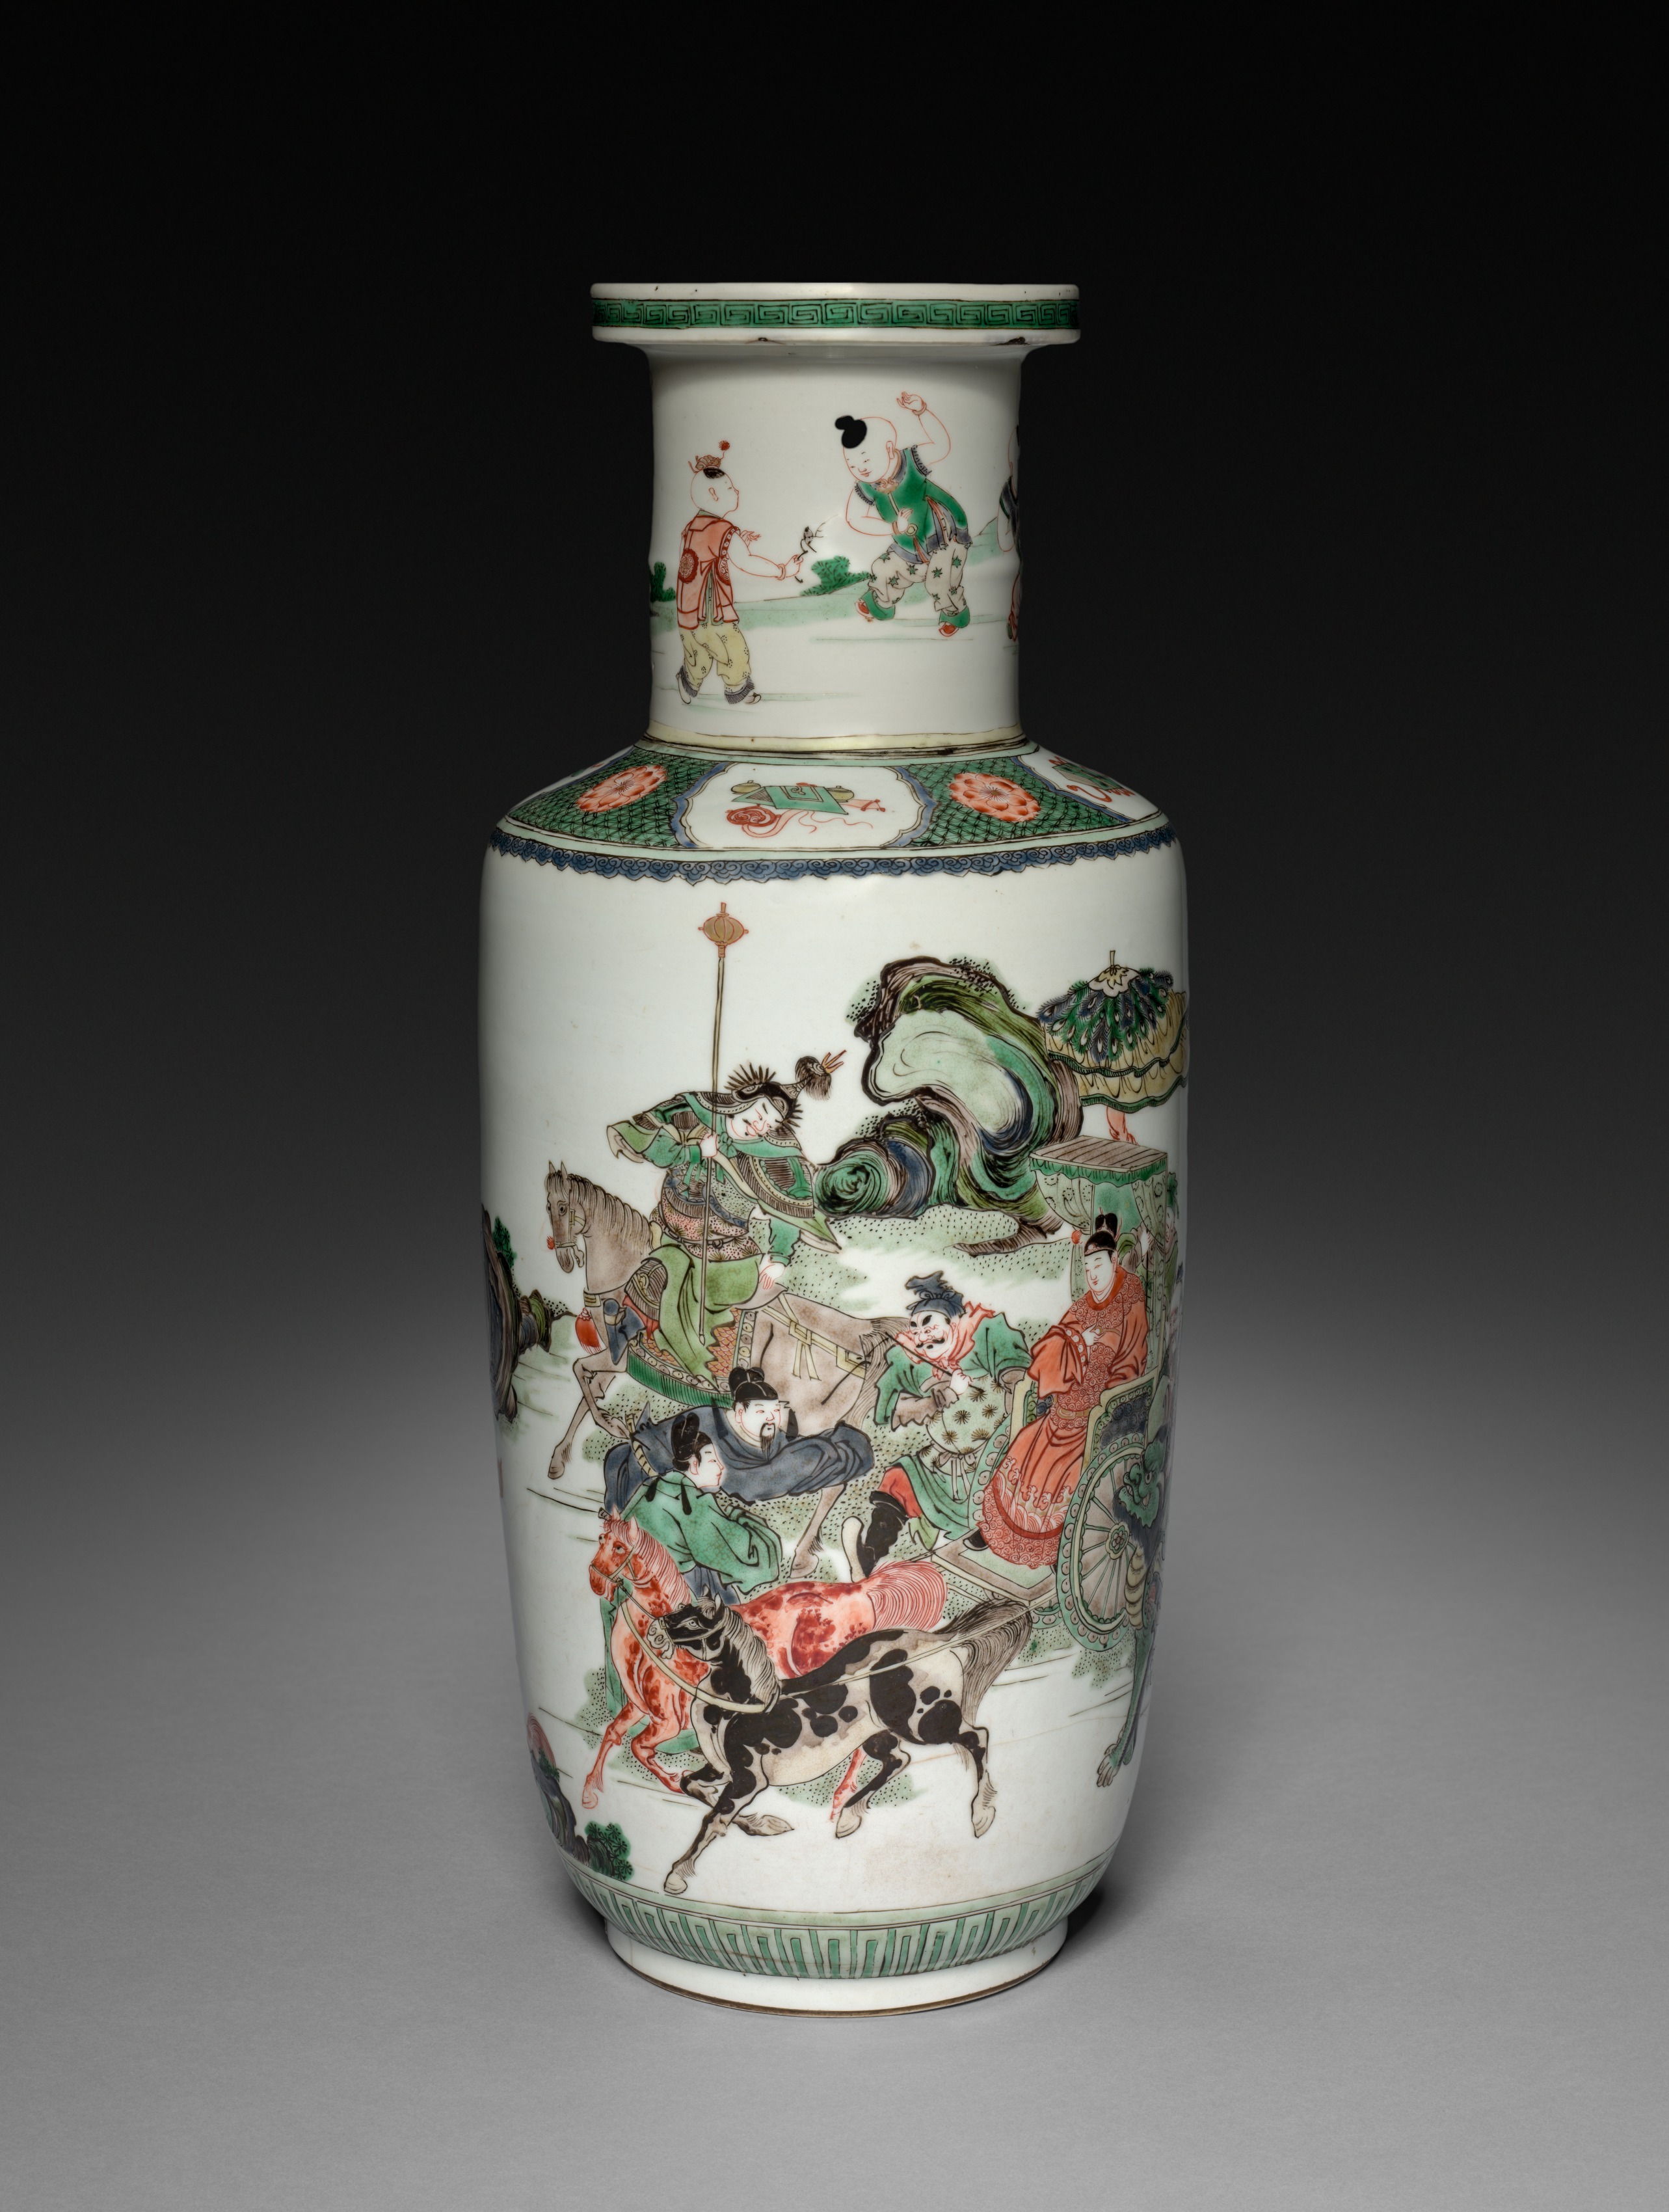 Vase with Decoration of Figures in Chariots